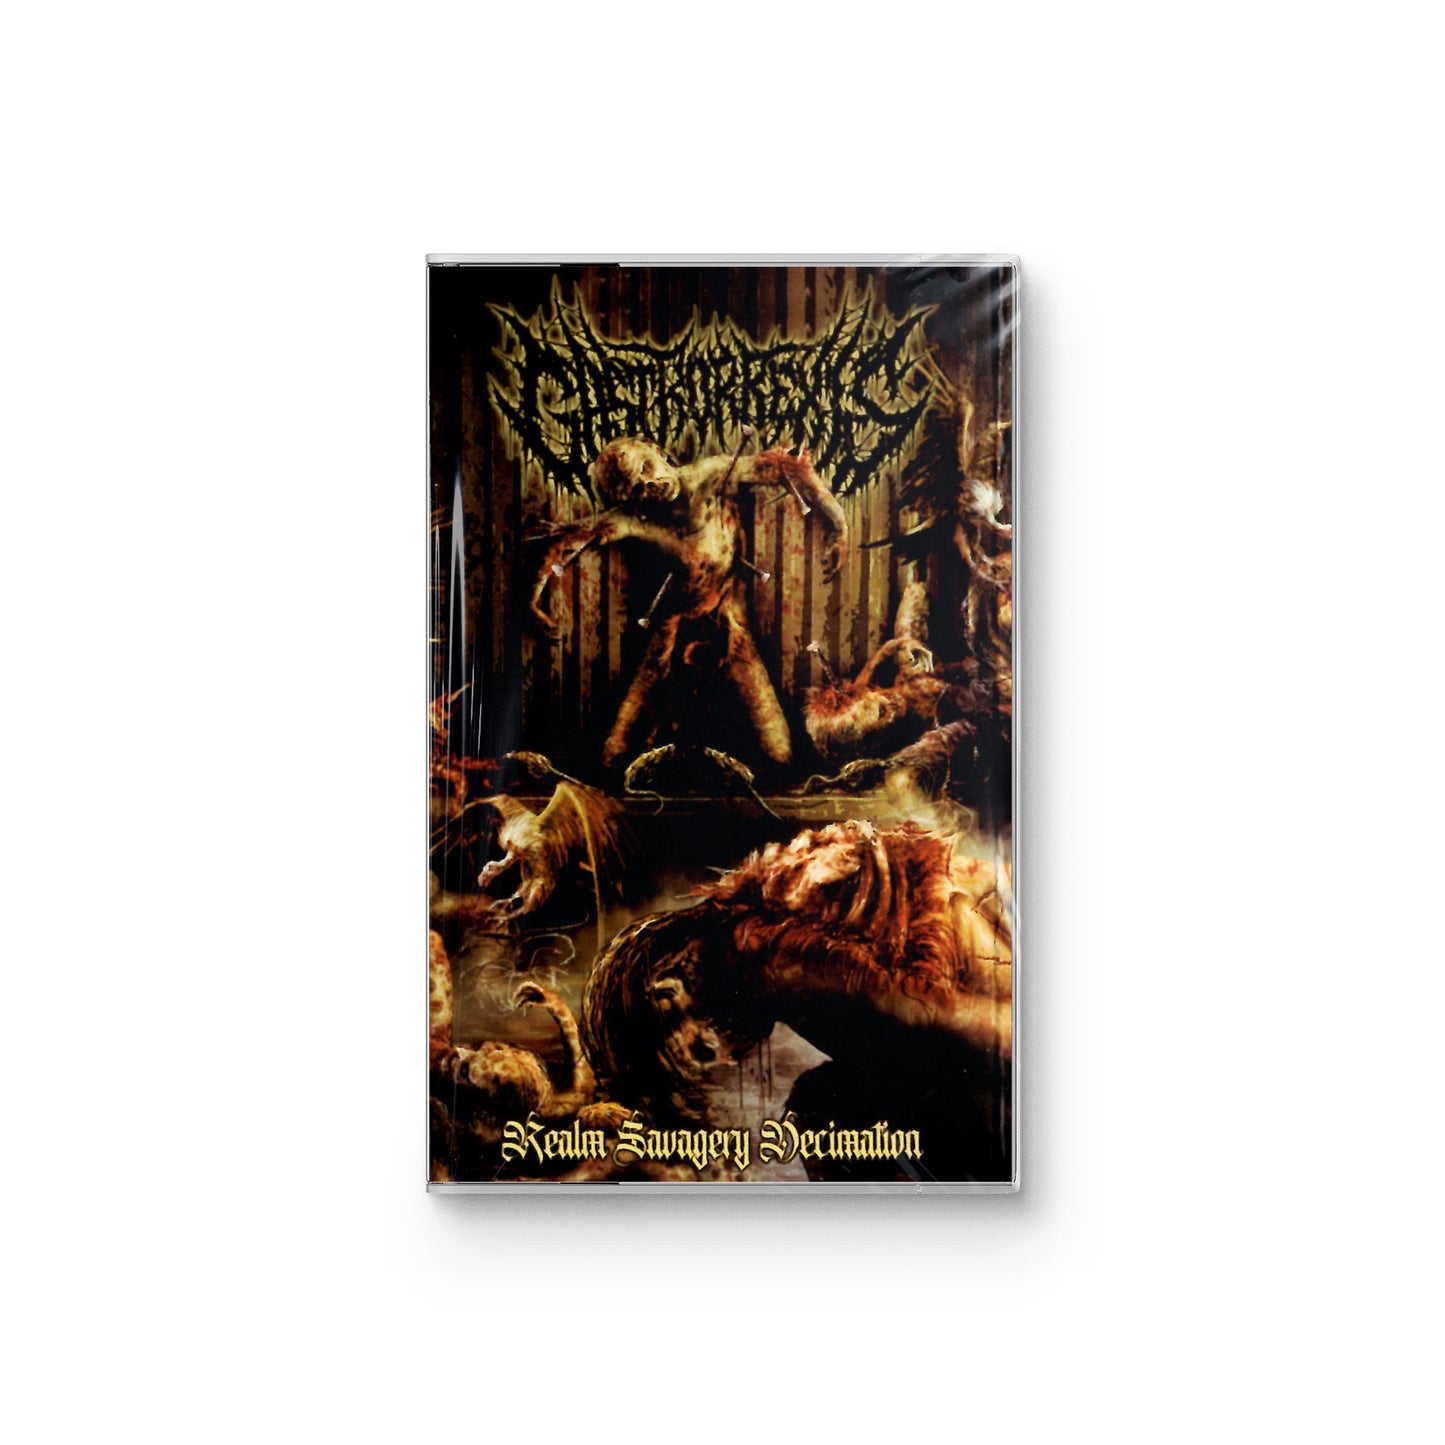 Gastrorrexis "Realm Savagery Decimation" CASSETTE